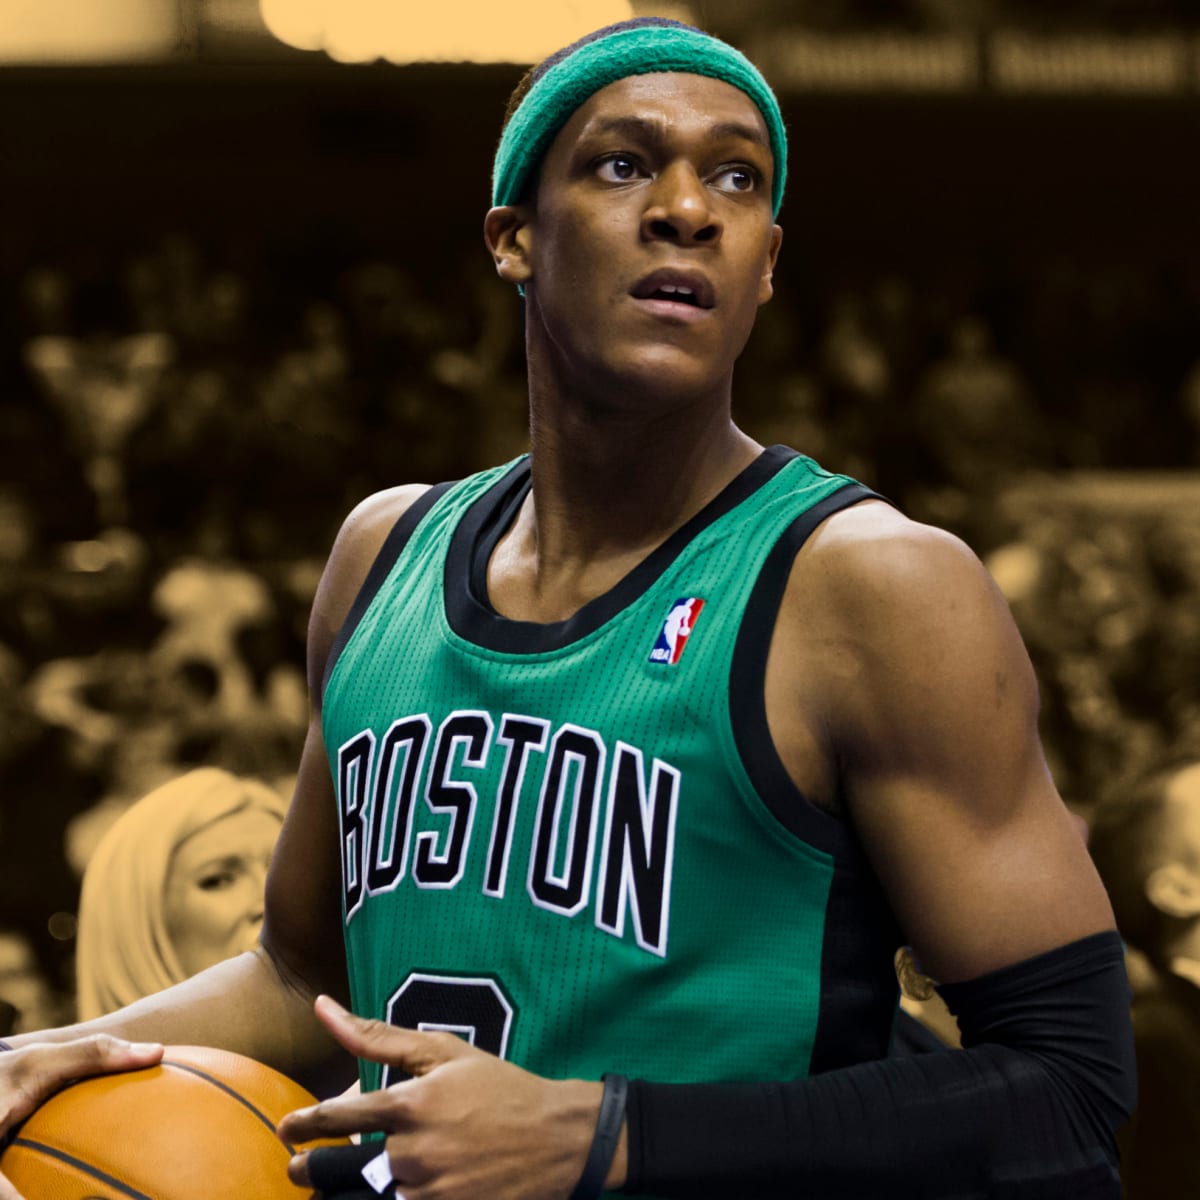 NBA Rumors: Rajon Rondo and former All-Stars who may retire right now